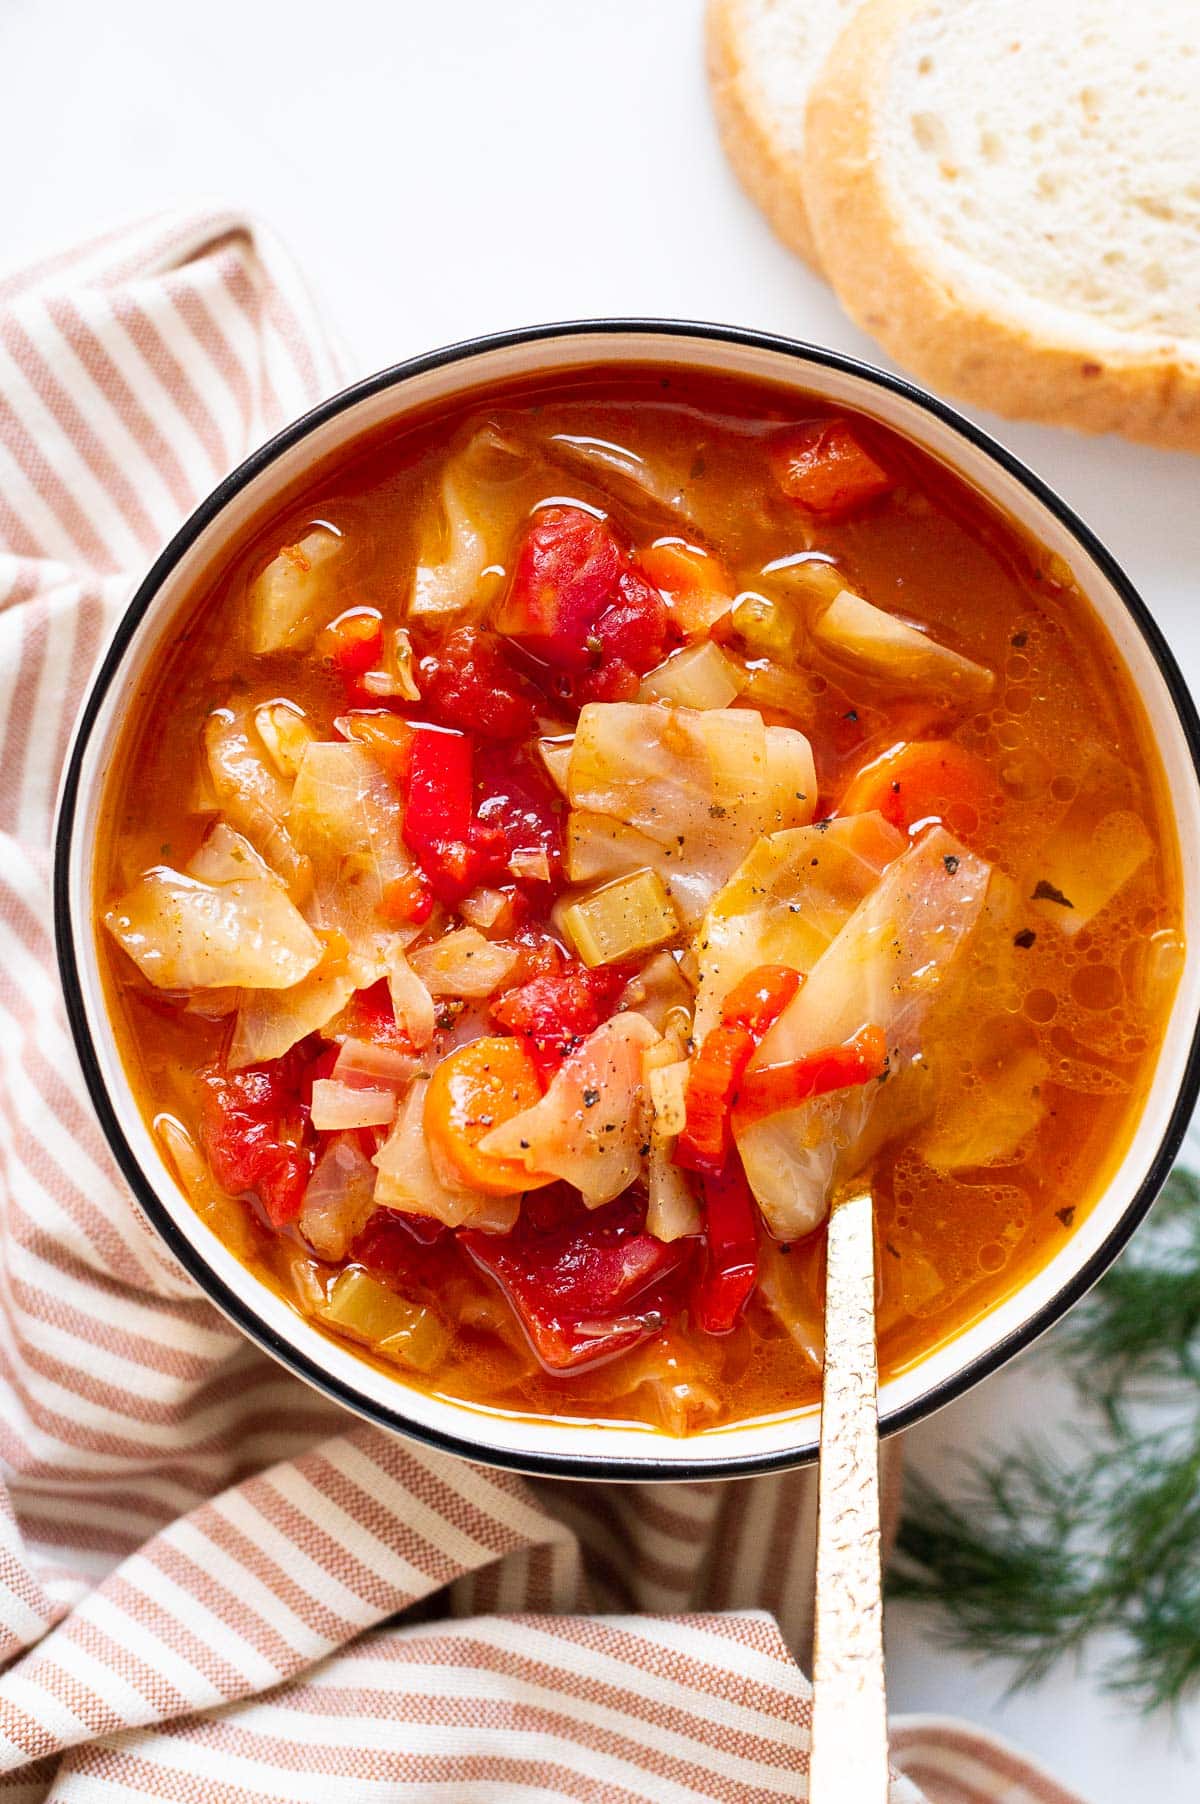 Pressure cooker cabbage soup with tomatoes and carrots served in a bowl with a spoon.